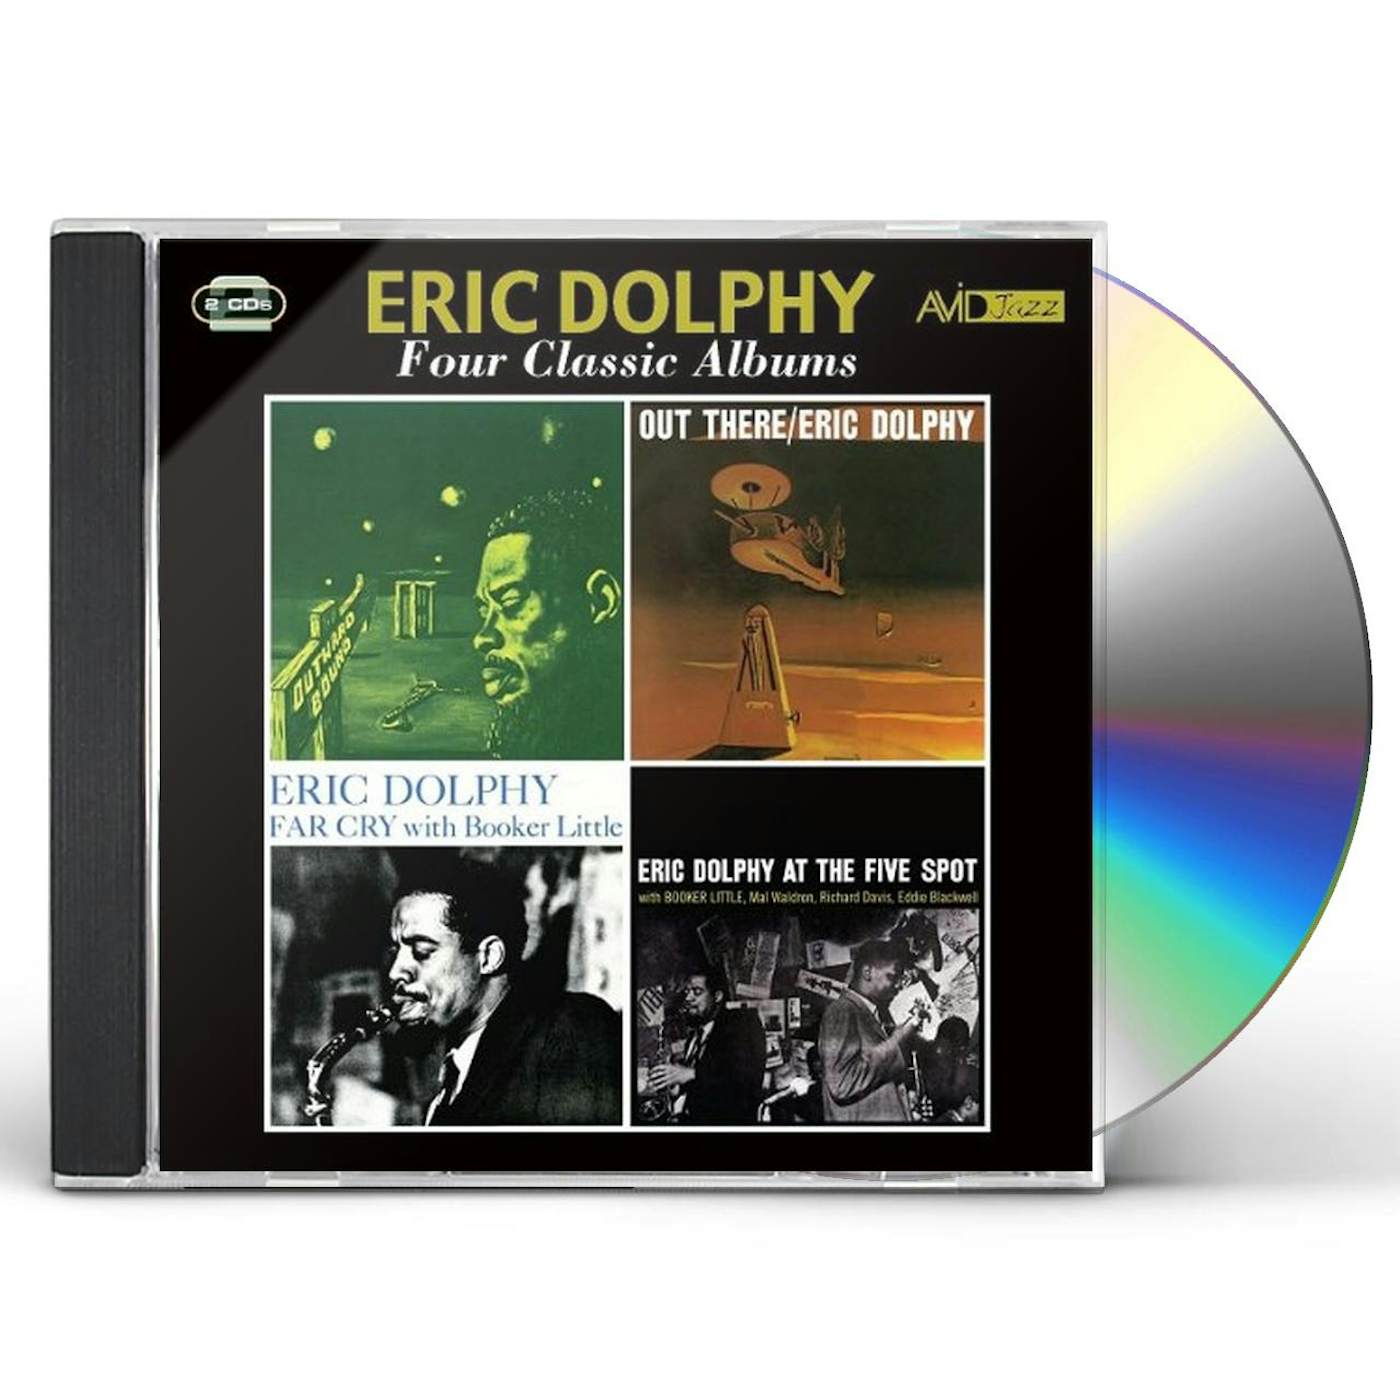 Eric Dolphy 4 CLASSIC ALBUMS CD